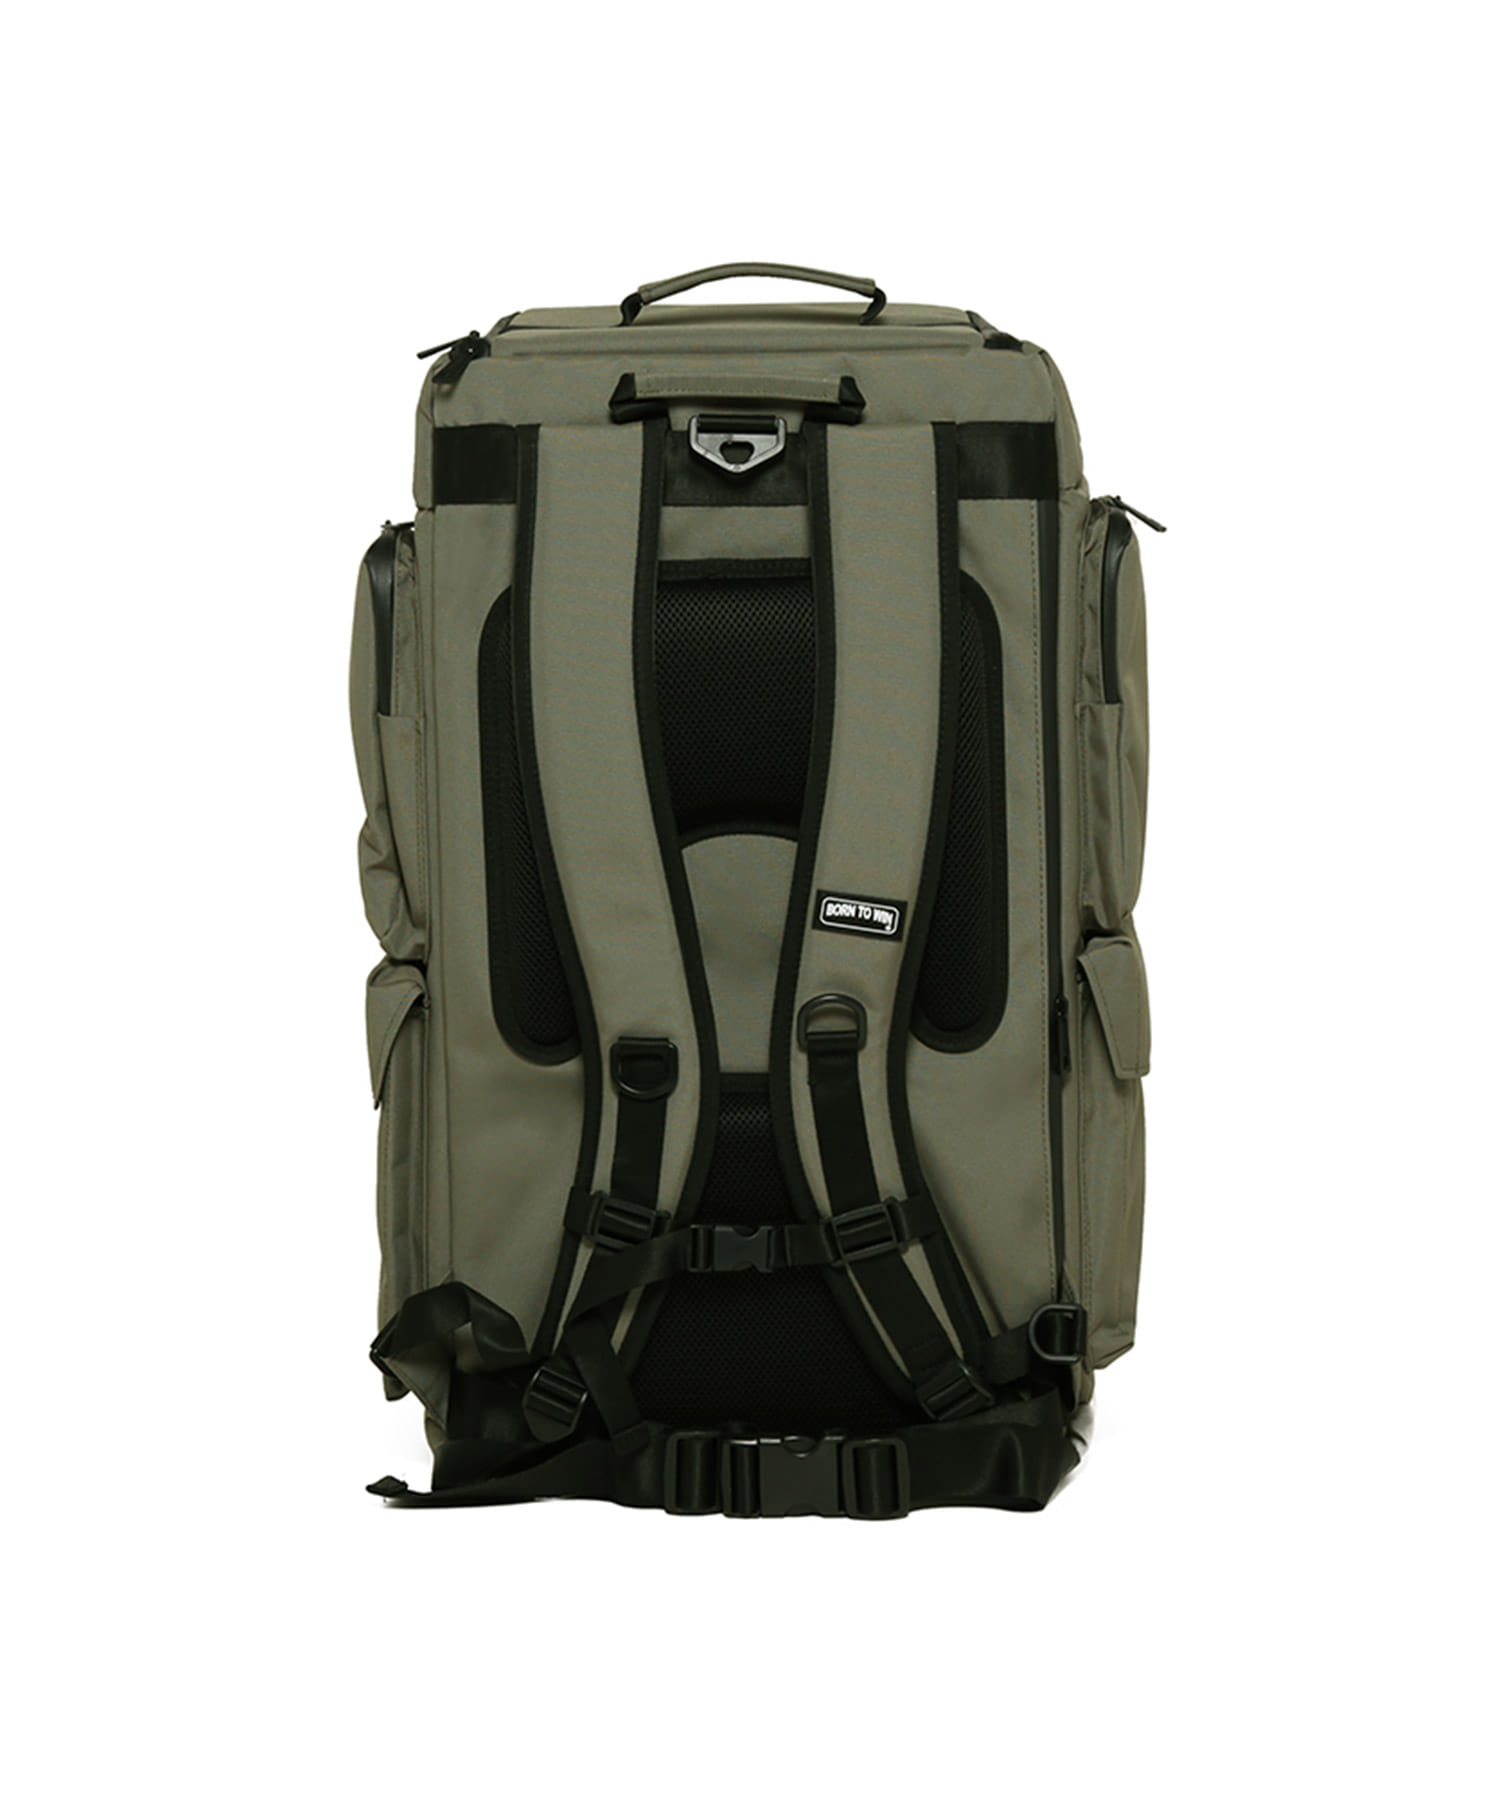 B1 BACKPACK NO PATCH VER [KHAKI]